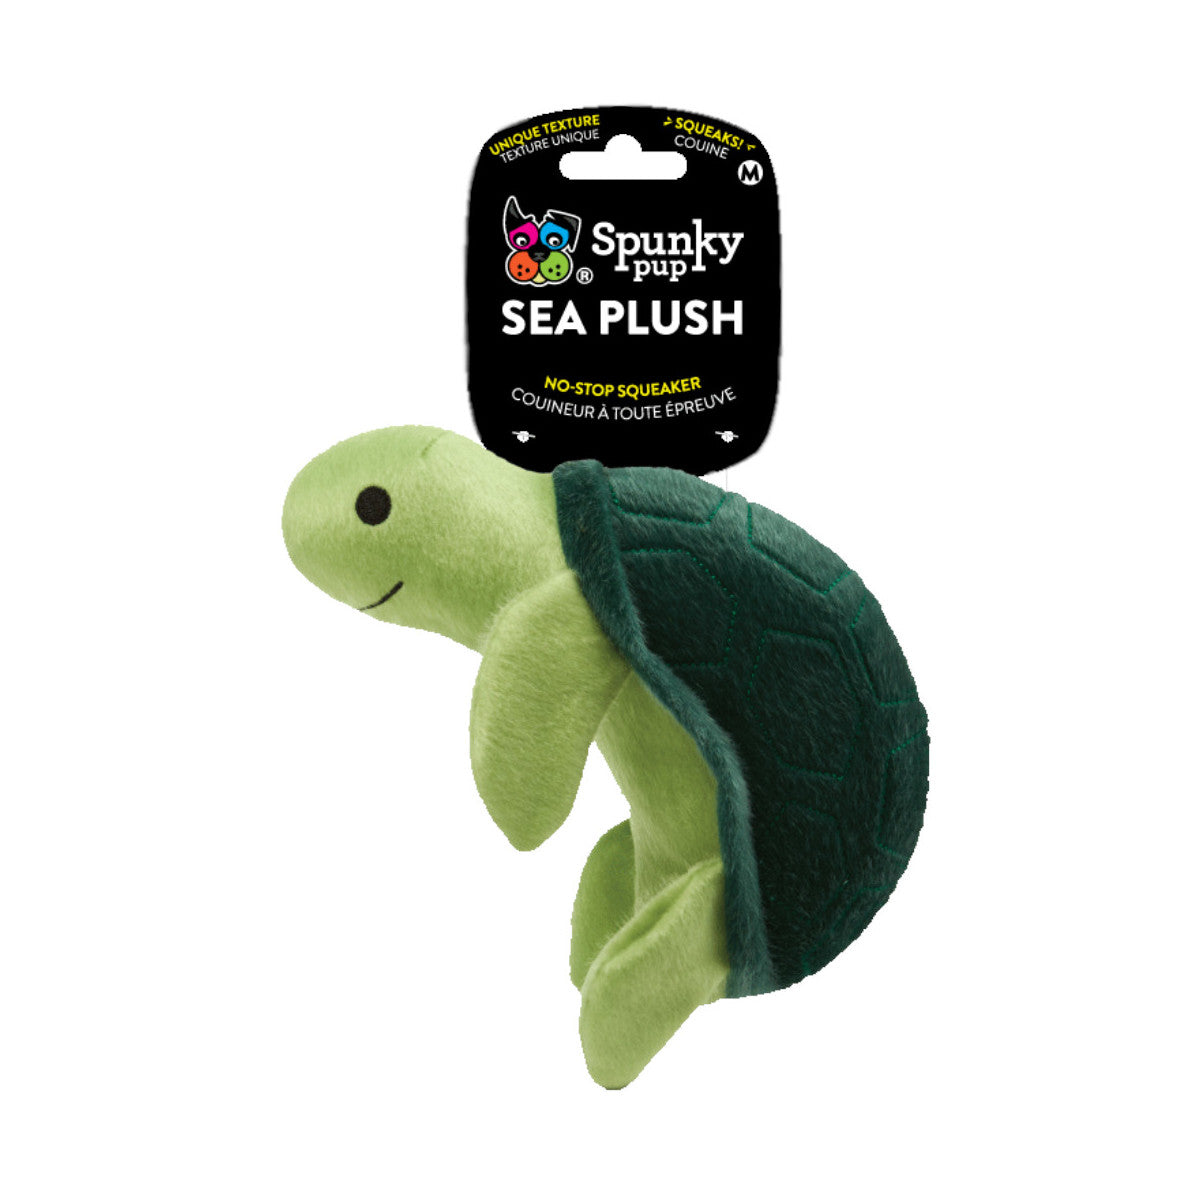 Spunky Pup Sea Plush Turtle Dog Toy, with Squeaker, Size Medium.